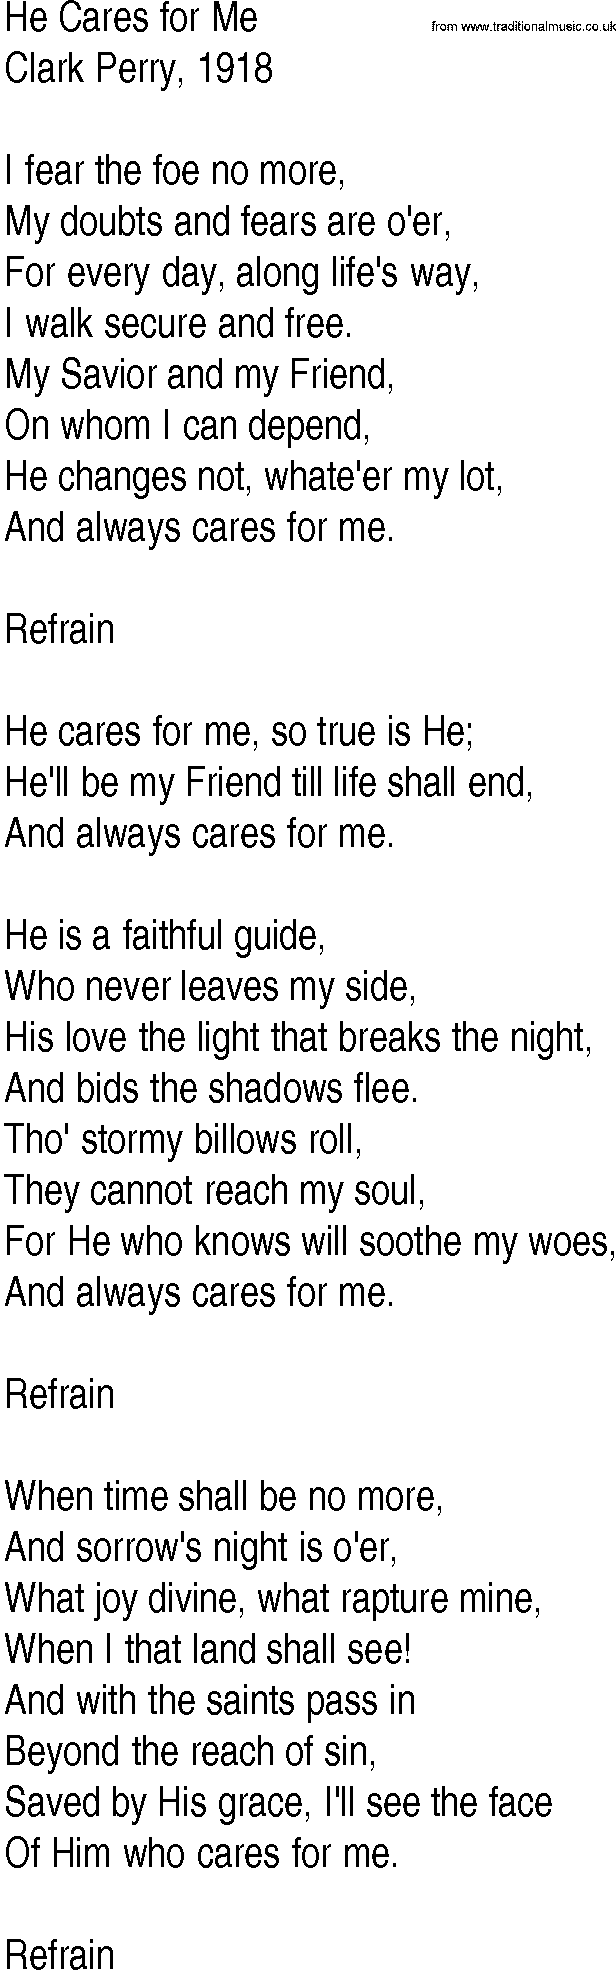 Hymn and Gospel Song: He Cares for Me by Clark Perry lyrics